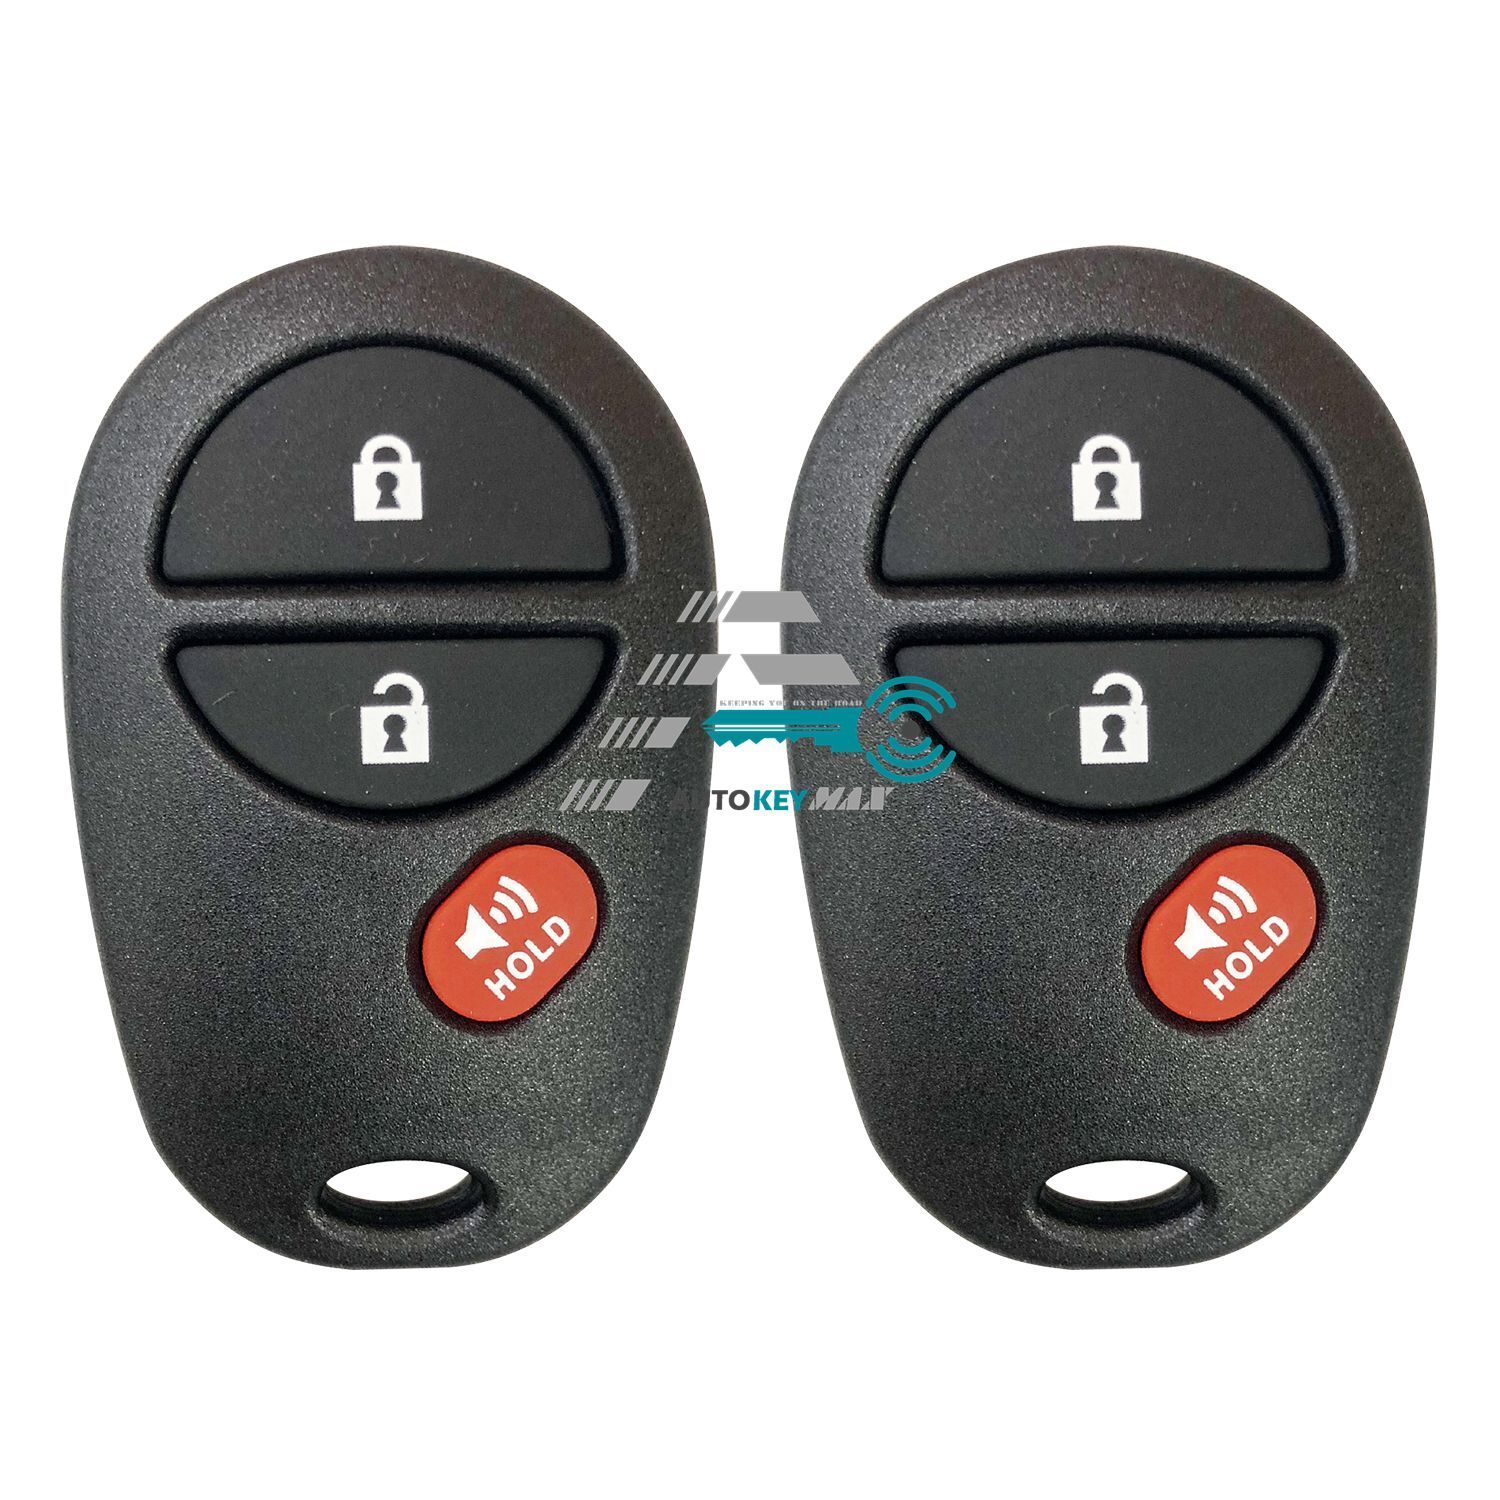 2 NEW Replacement For 2005-2016 TACOMA Keyless Entry Remote Control GQ43VT20T